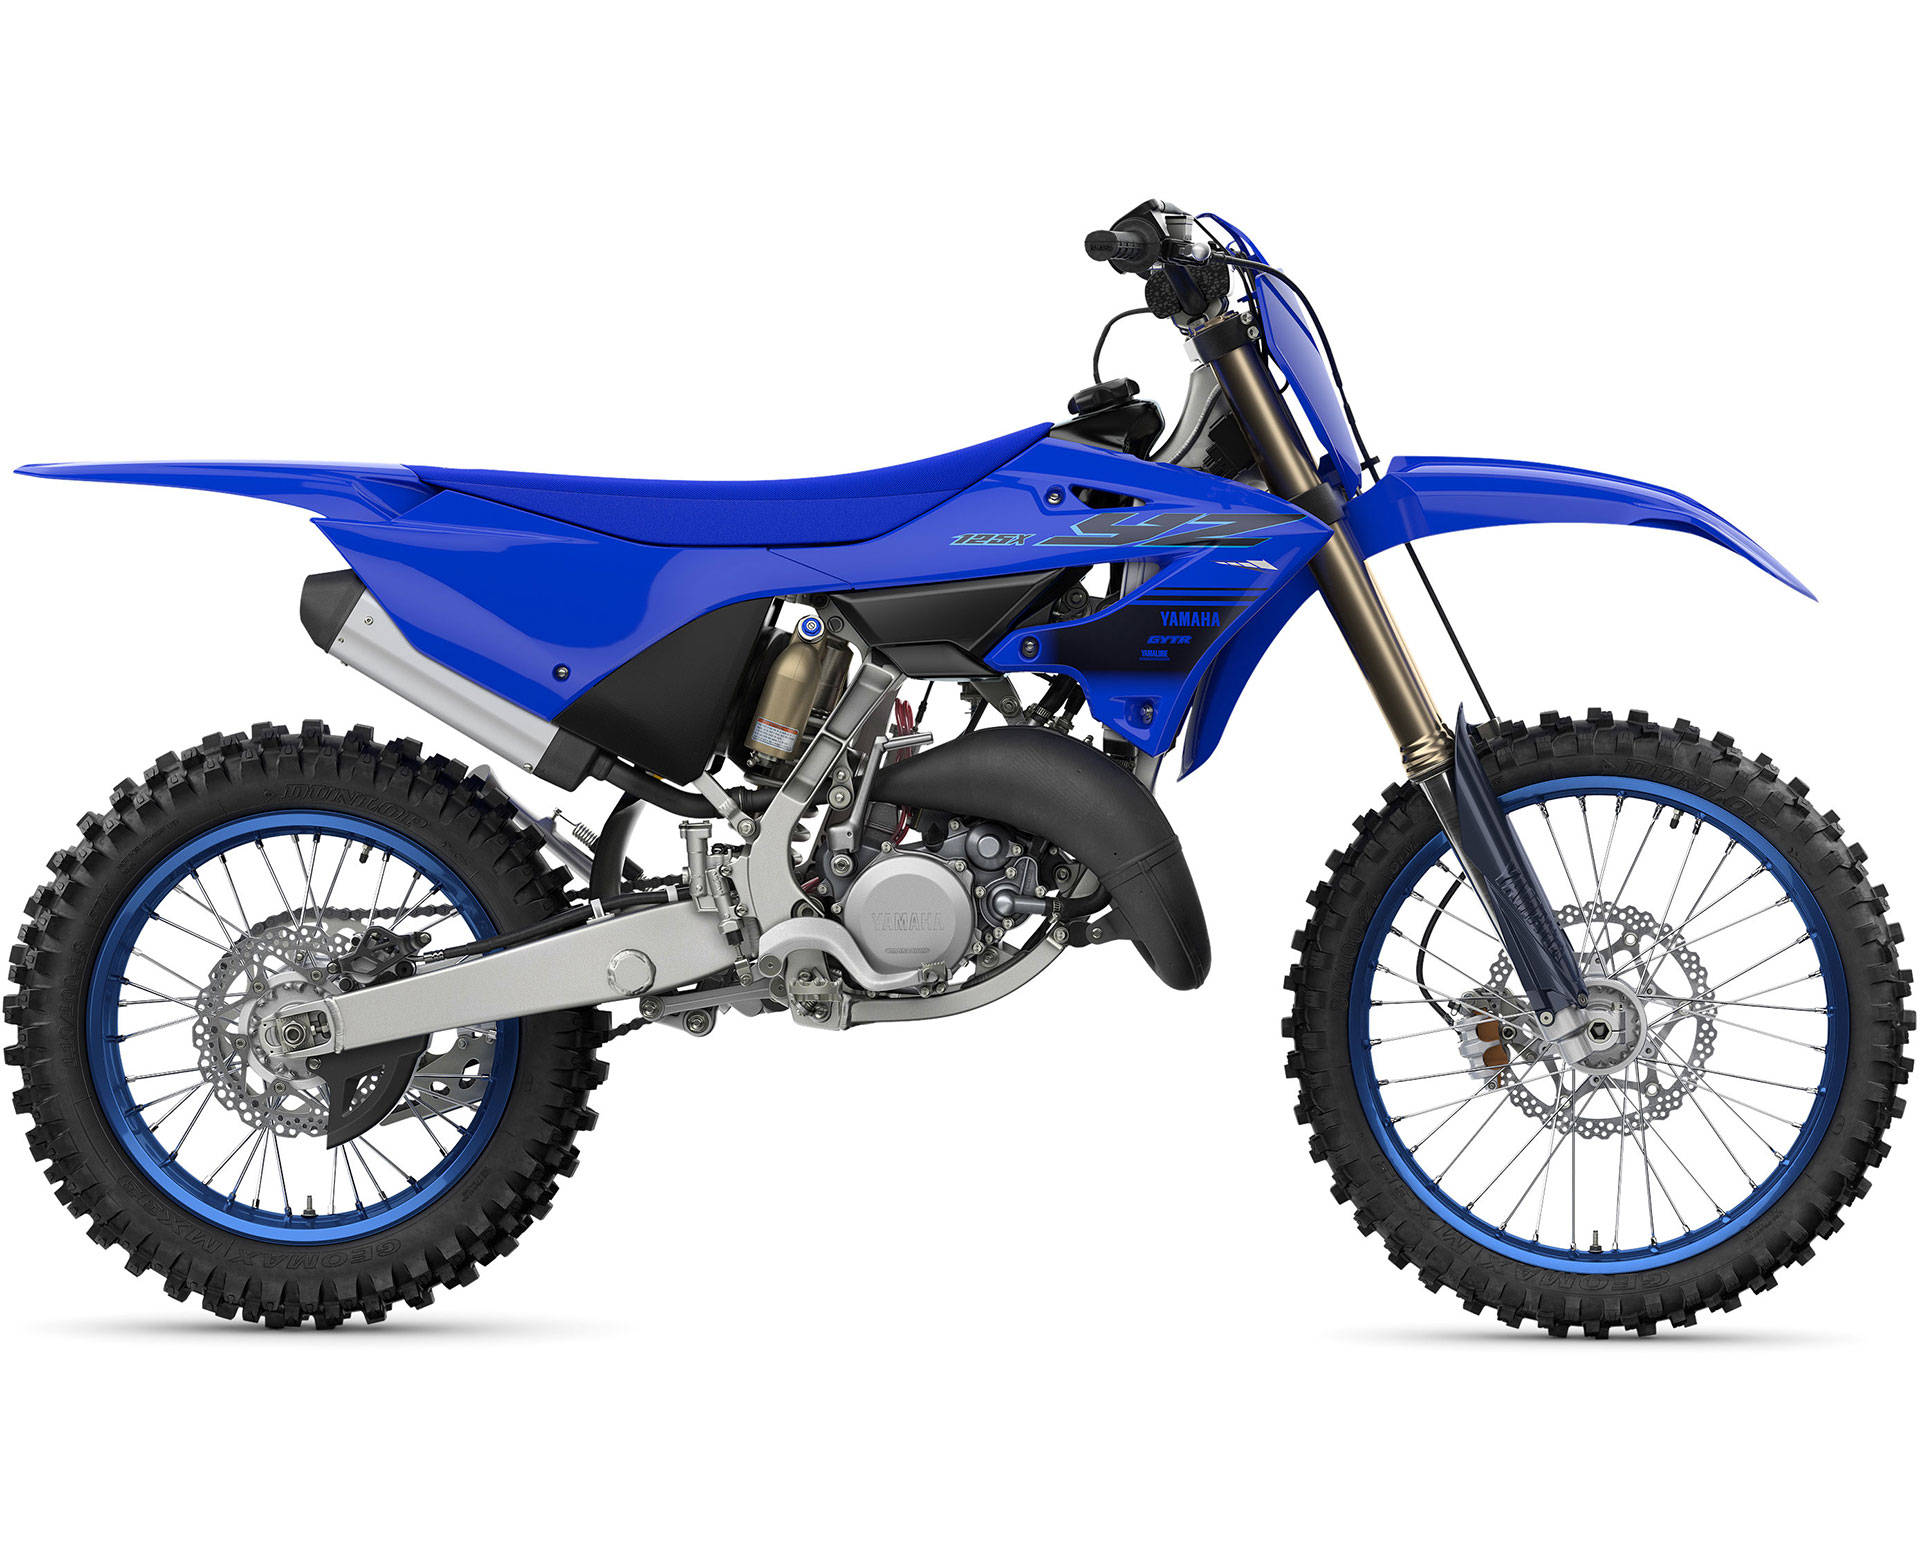 Thumbnail of your customized 2024 YZ125X